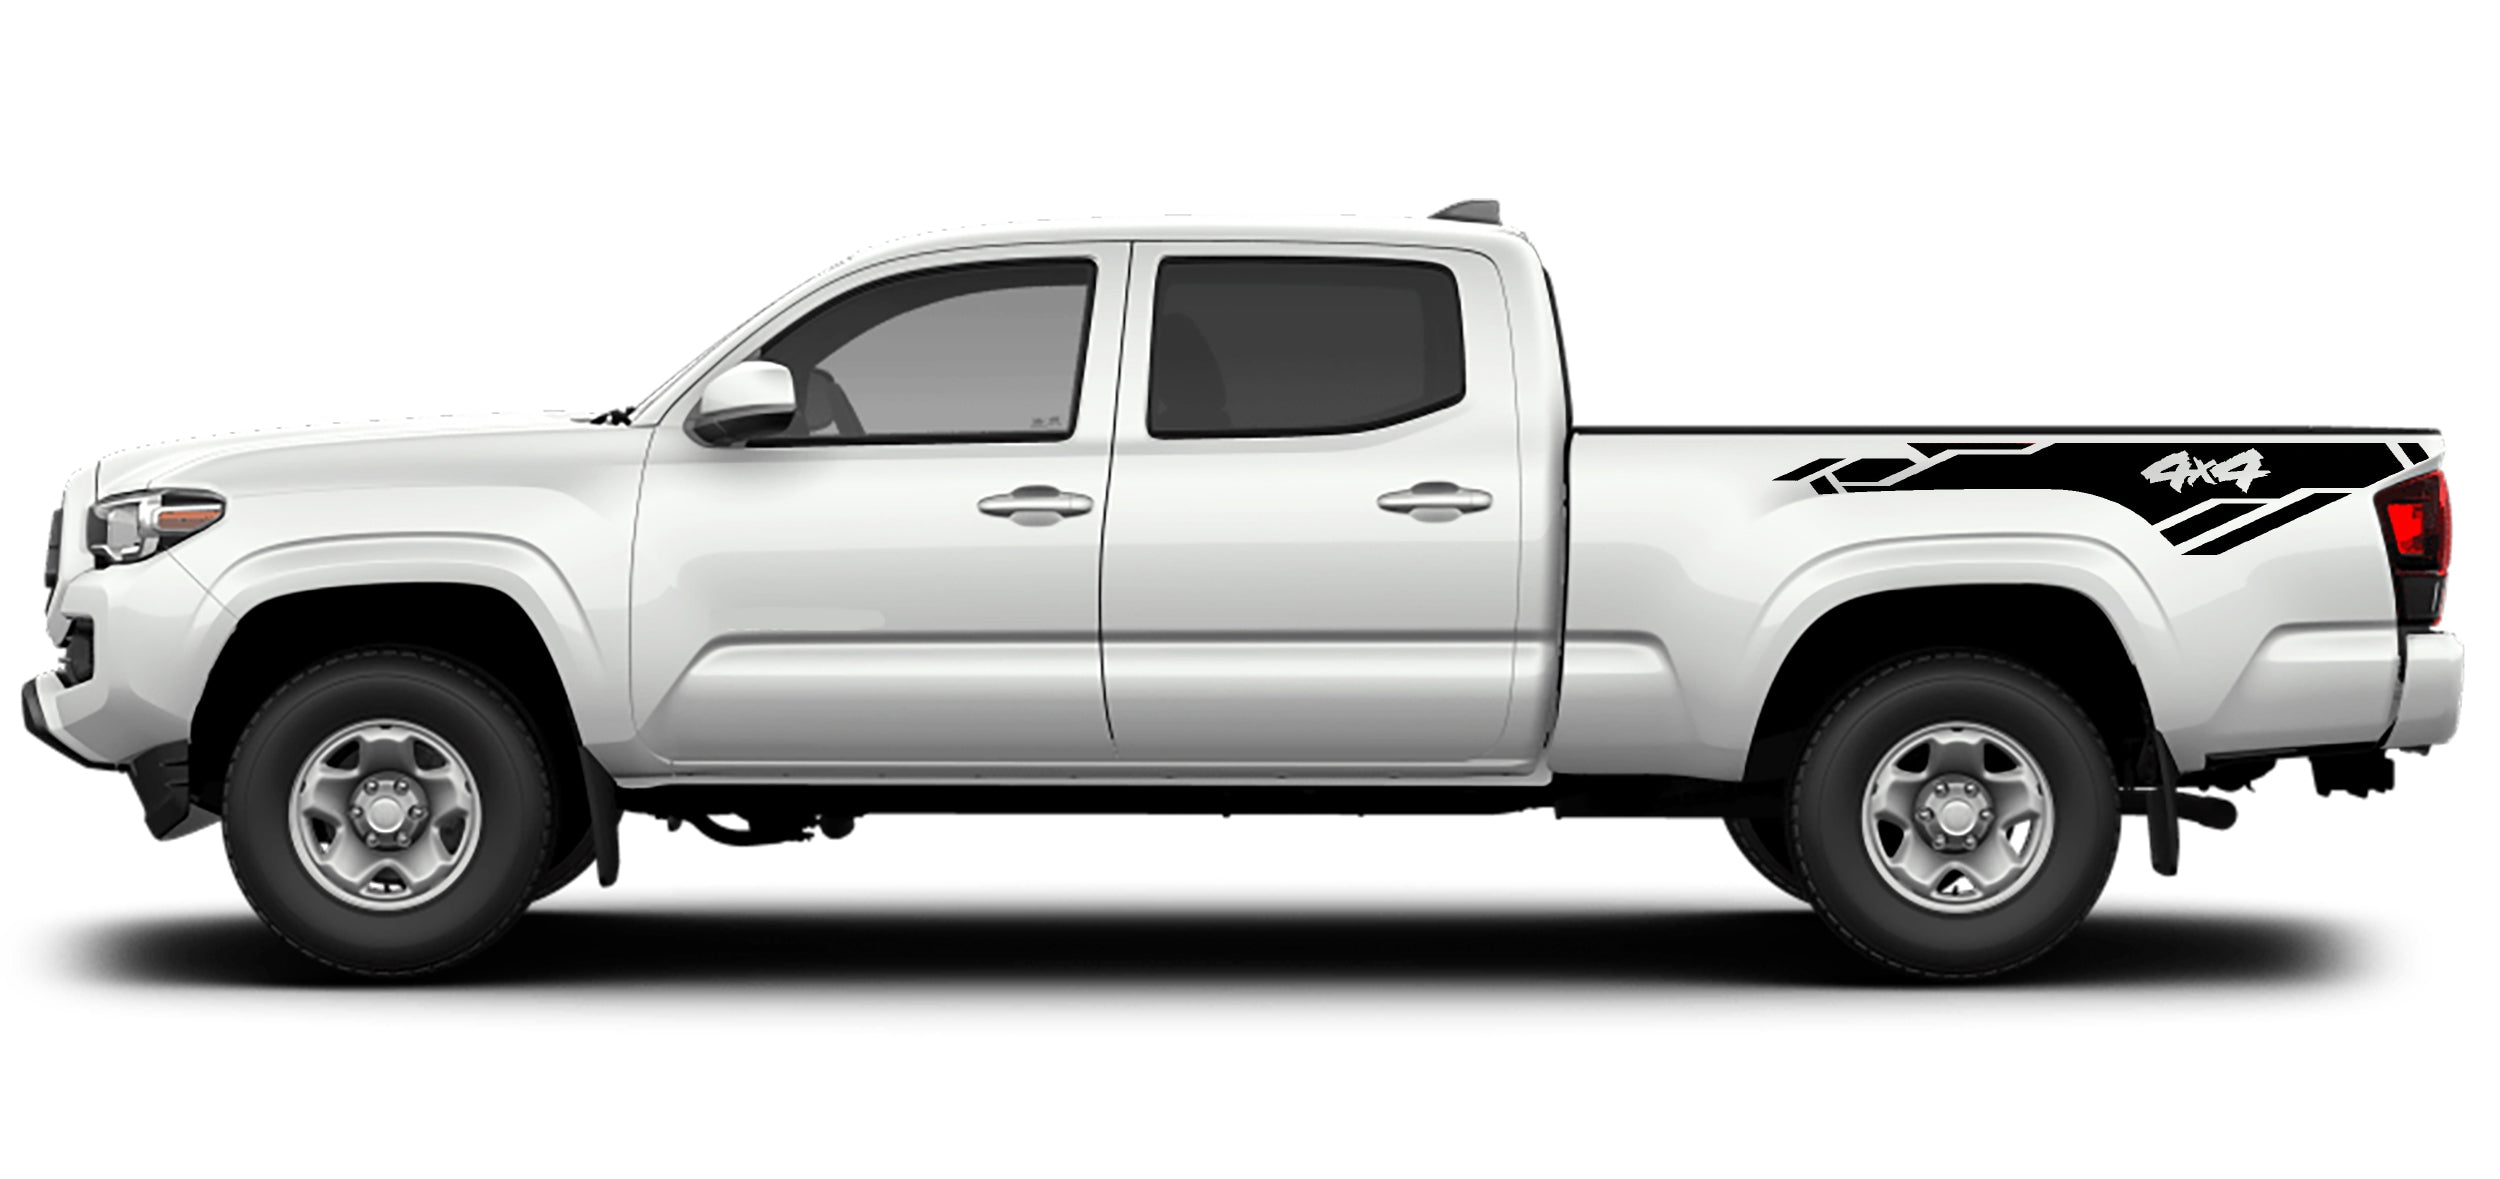 Toyota Tacoma 4x4 Off Road Bed Decals (Pair) : Vinyl Graphics Kit Fits (2016-2022)